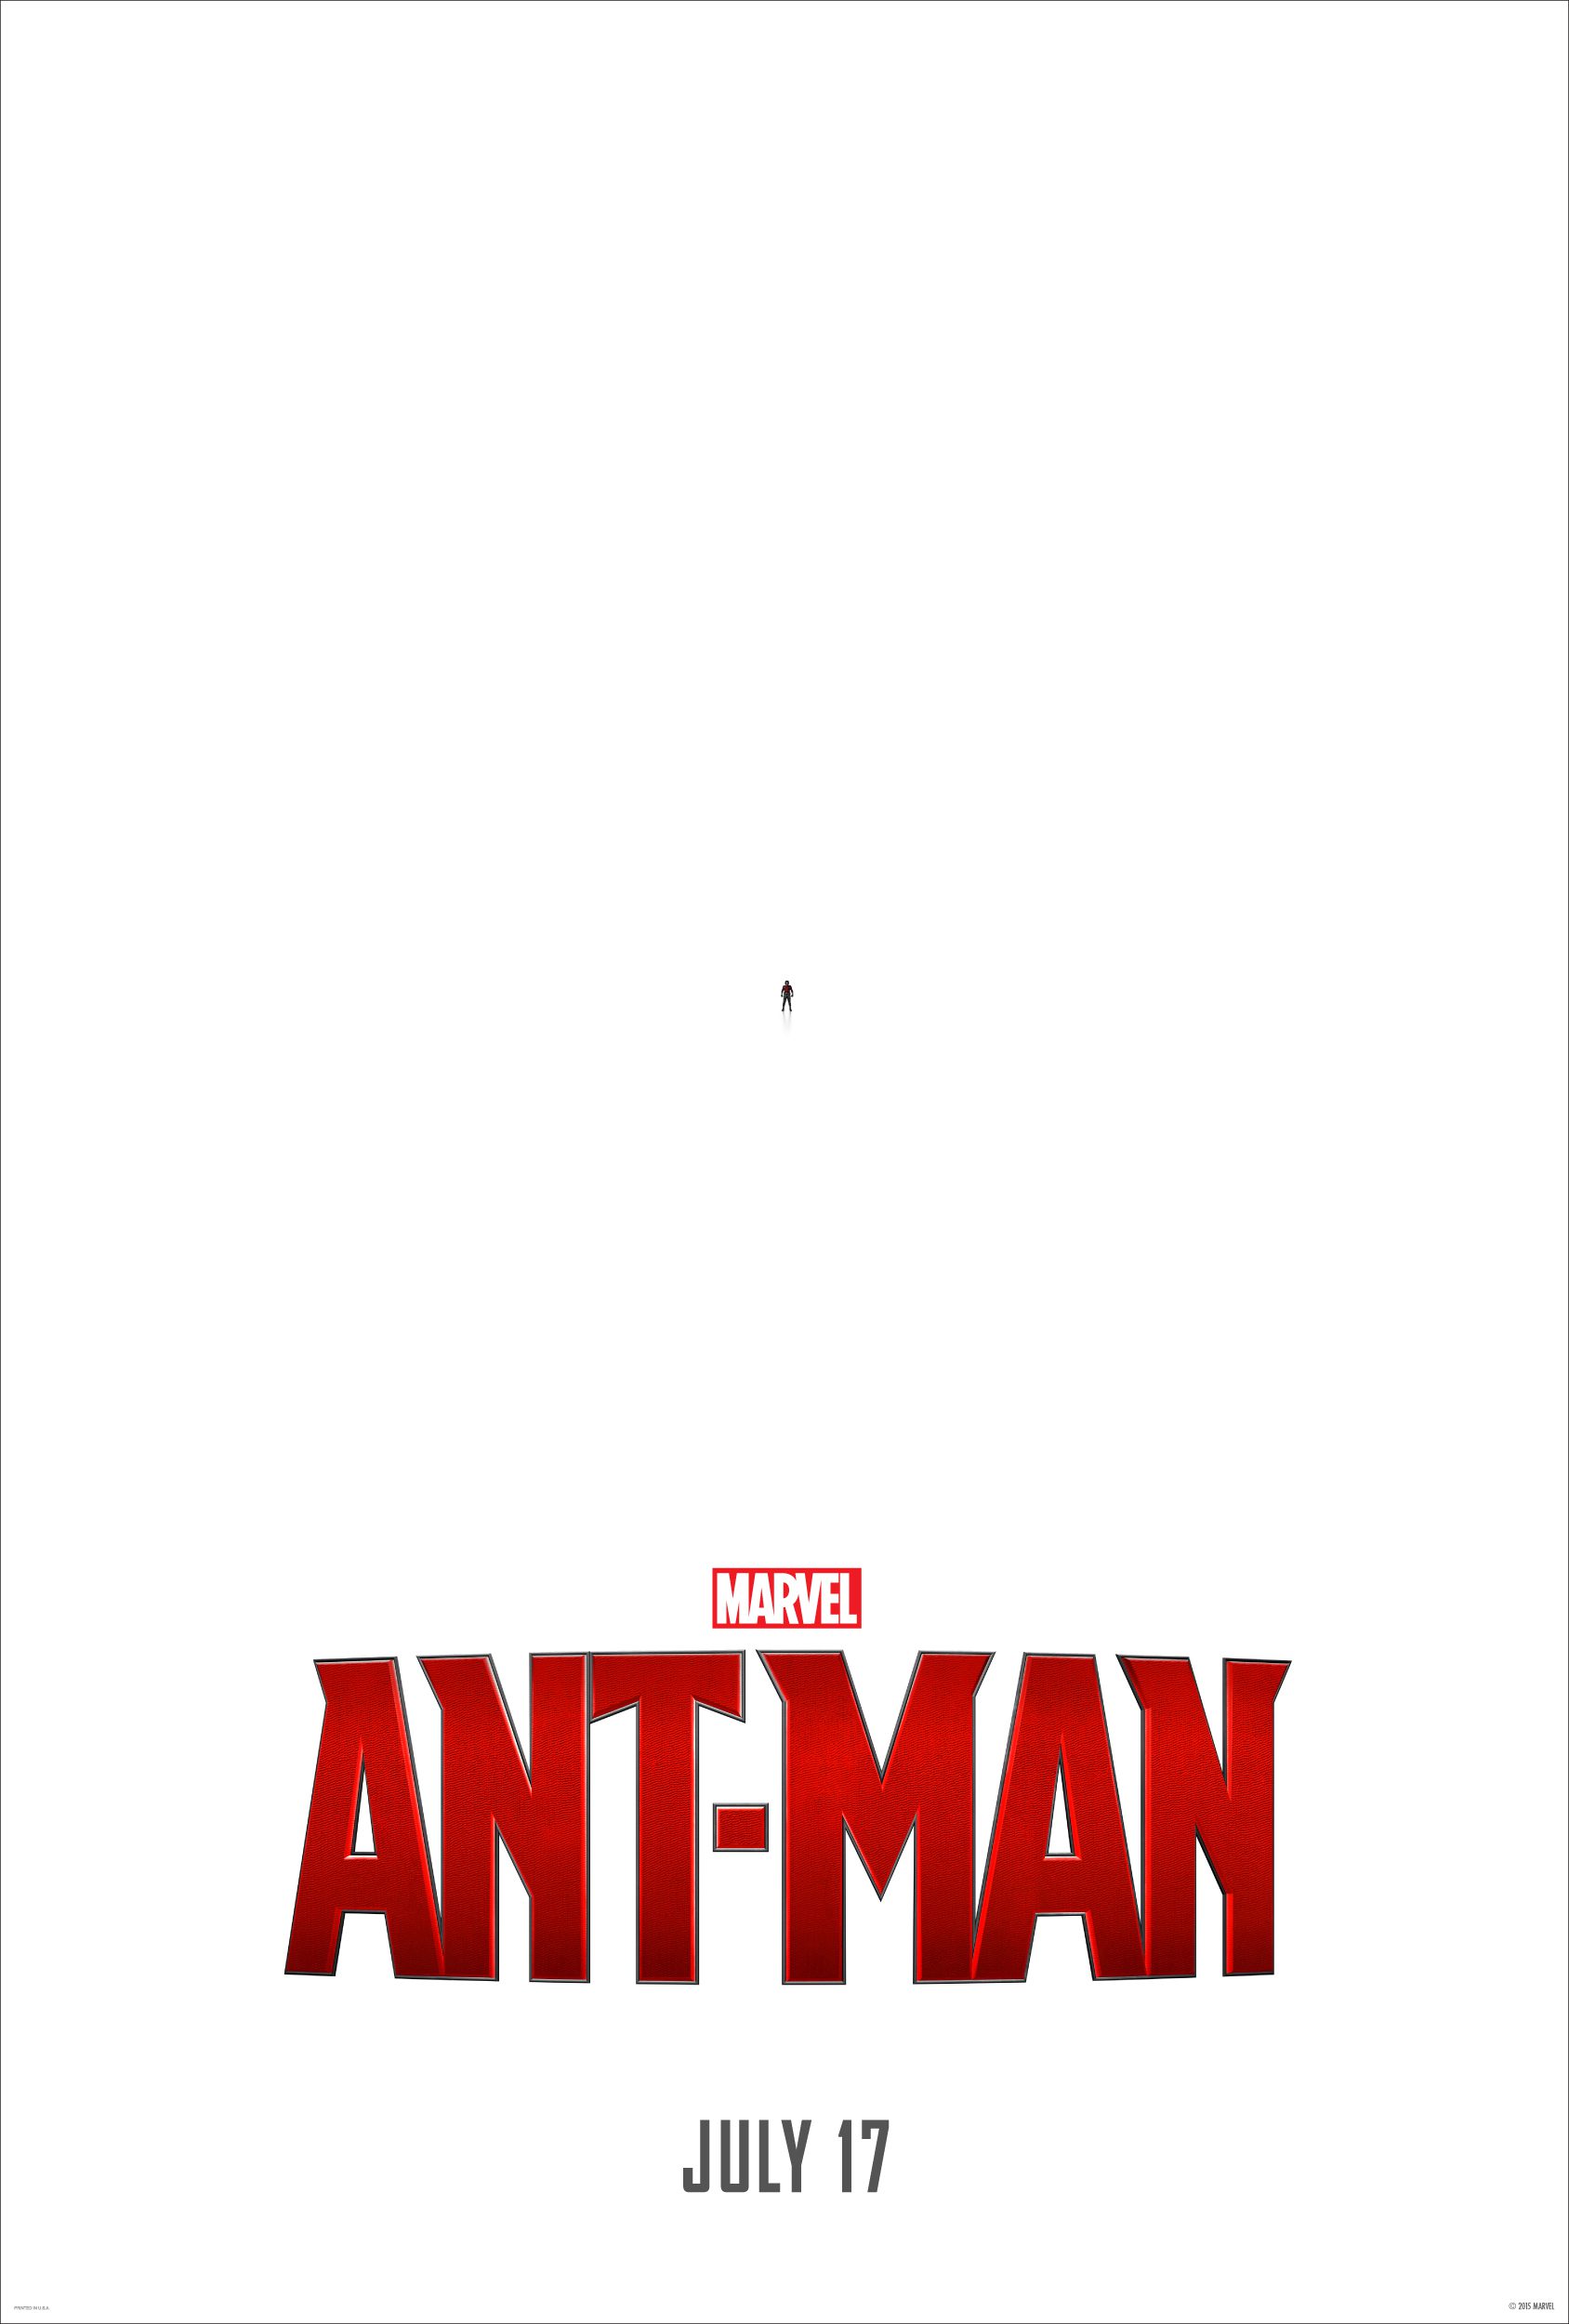 Check out the Trailer and Poster for Marvel’s ANT-MAN